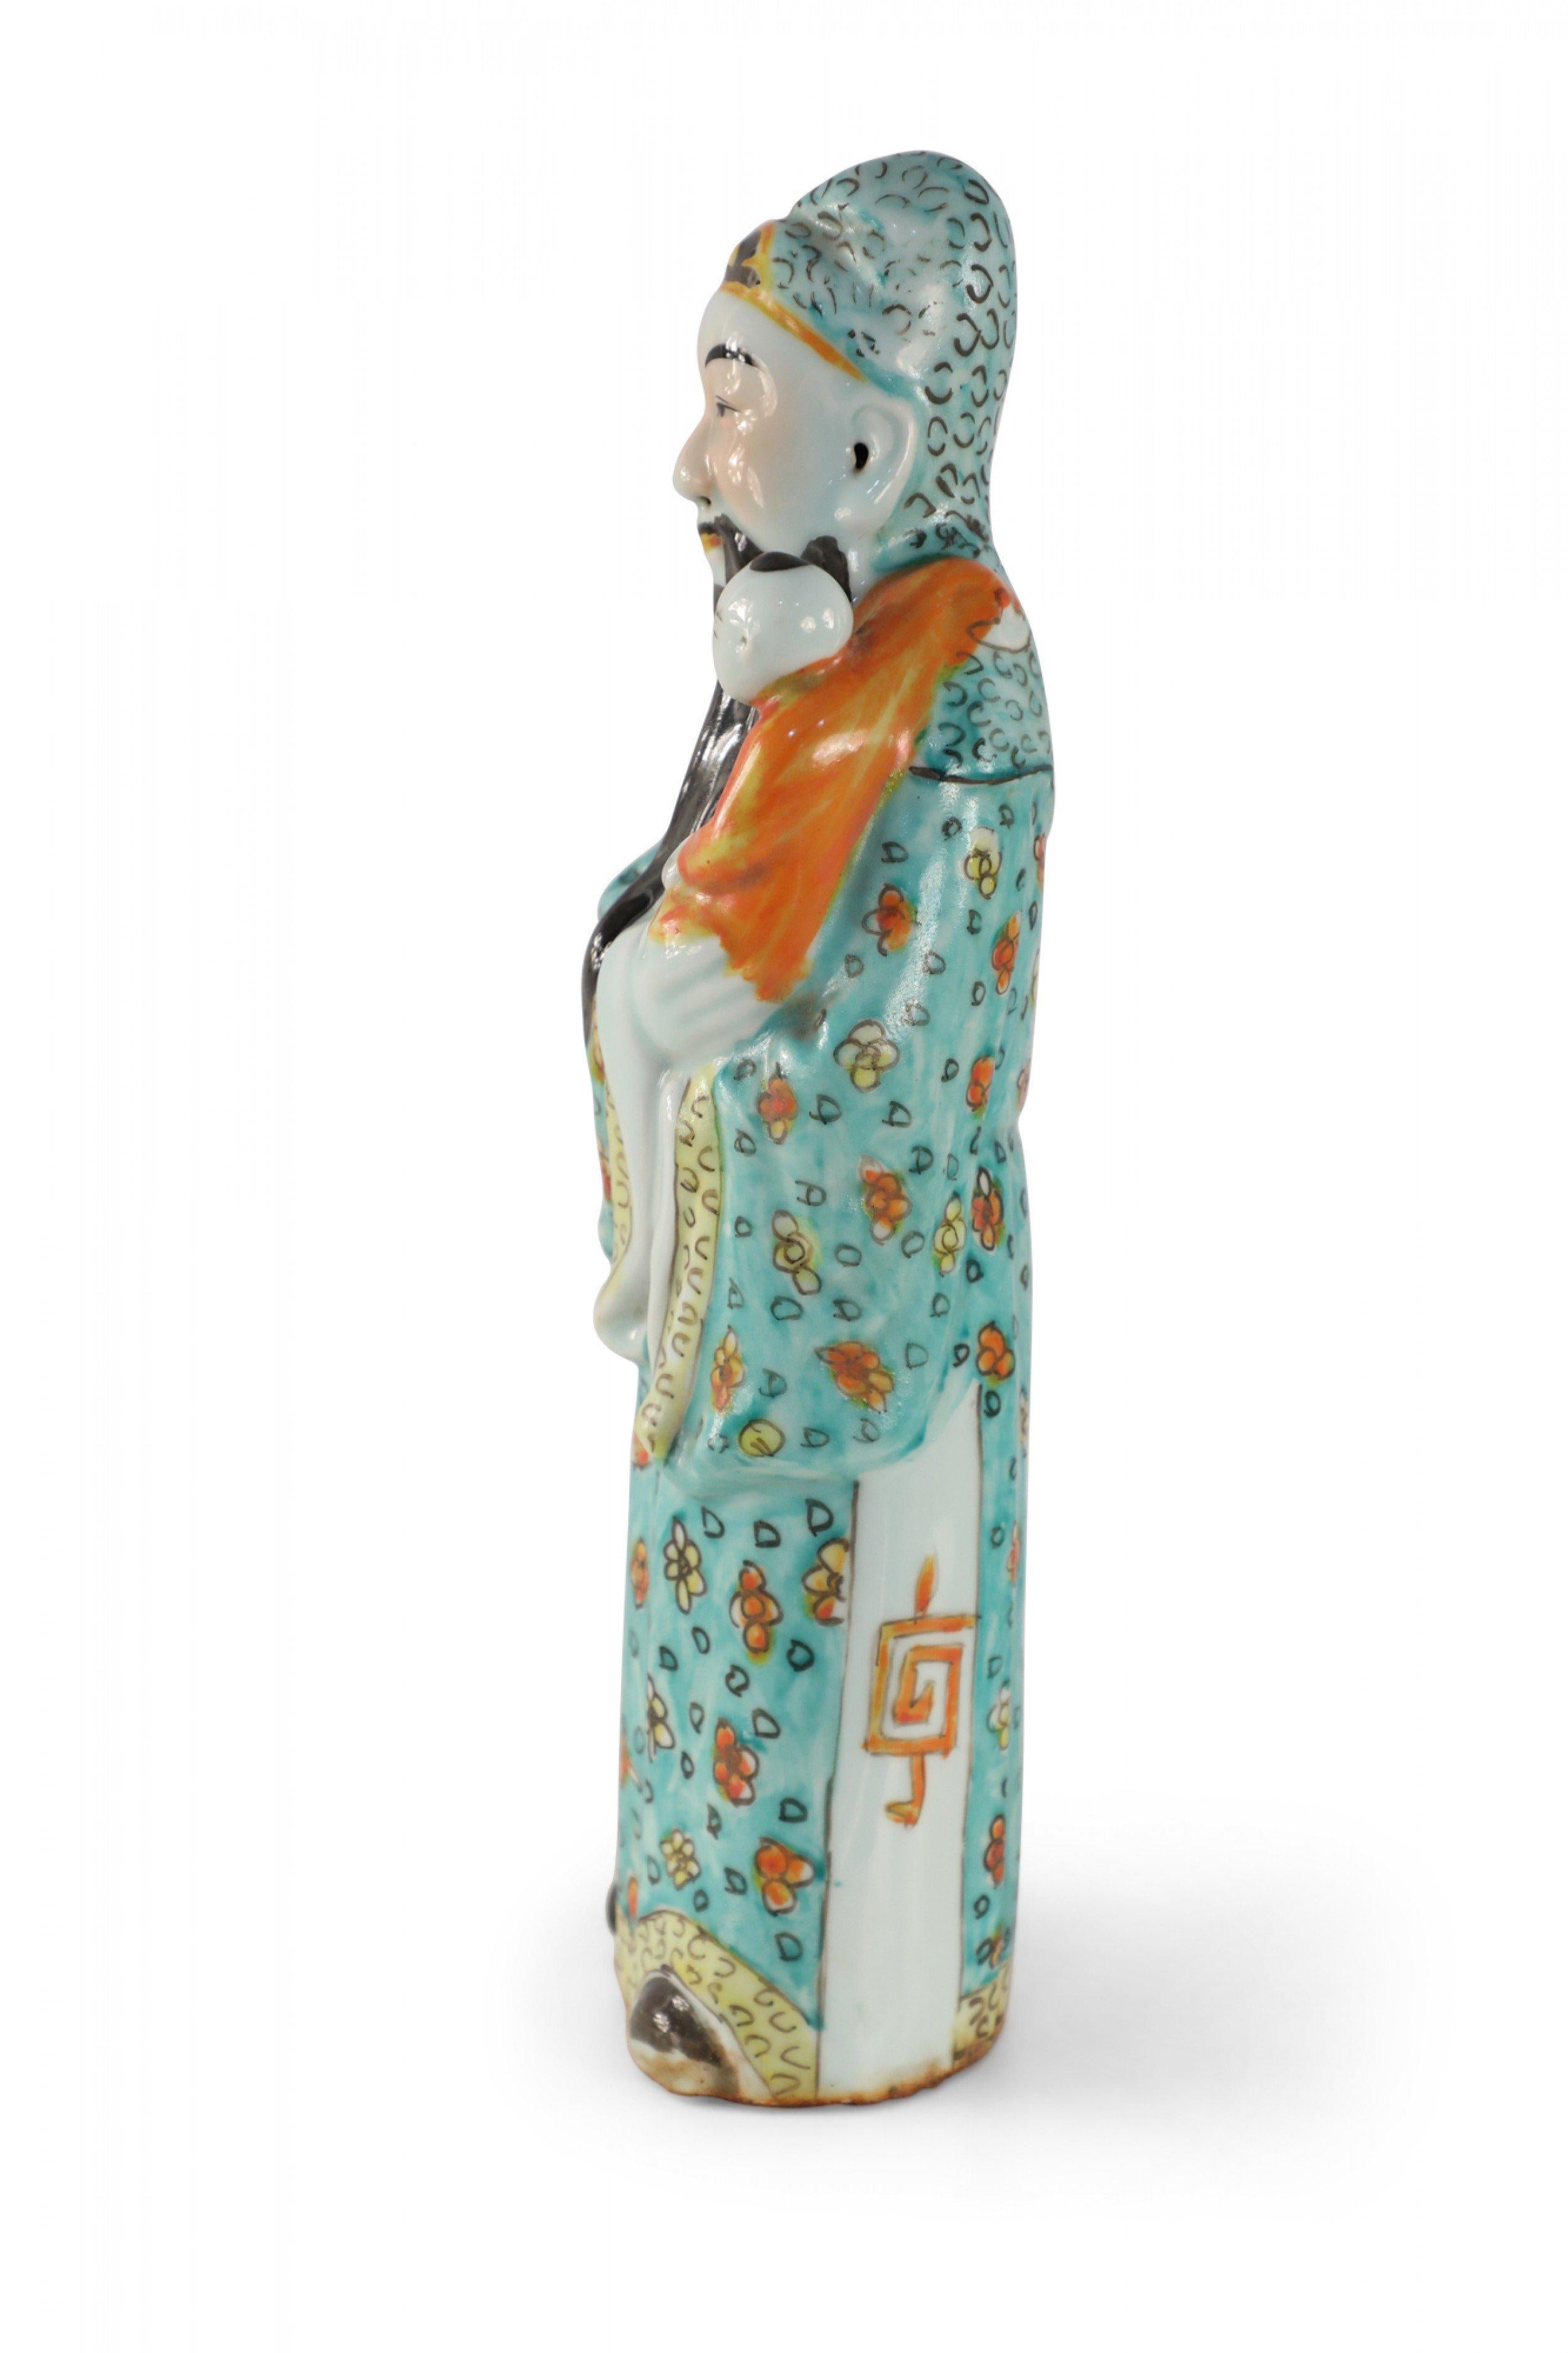 Antique Chinese (Early 20th Century) glazed porcelain statue of Lu Xing, one of the deities of the three stars considered essential in Chinese astrology, each representing an attribute of a good life. Xu Ling personifies wealth, influence and